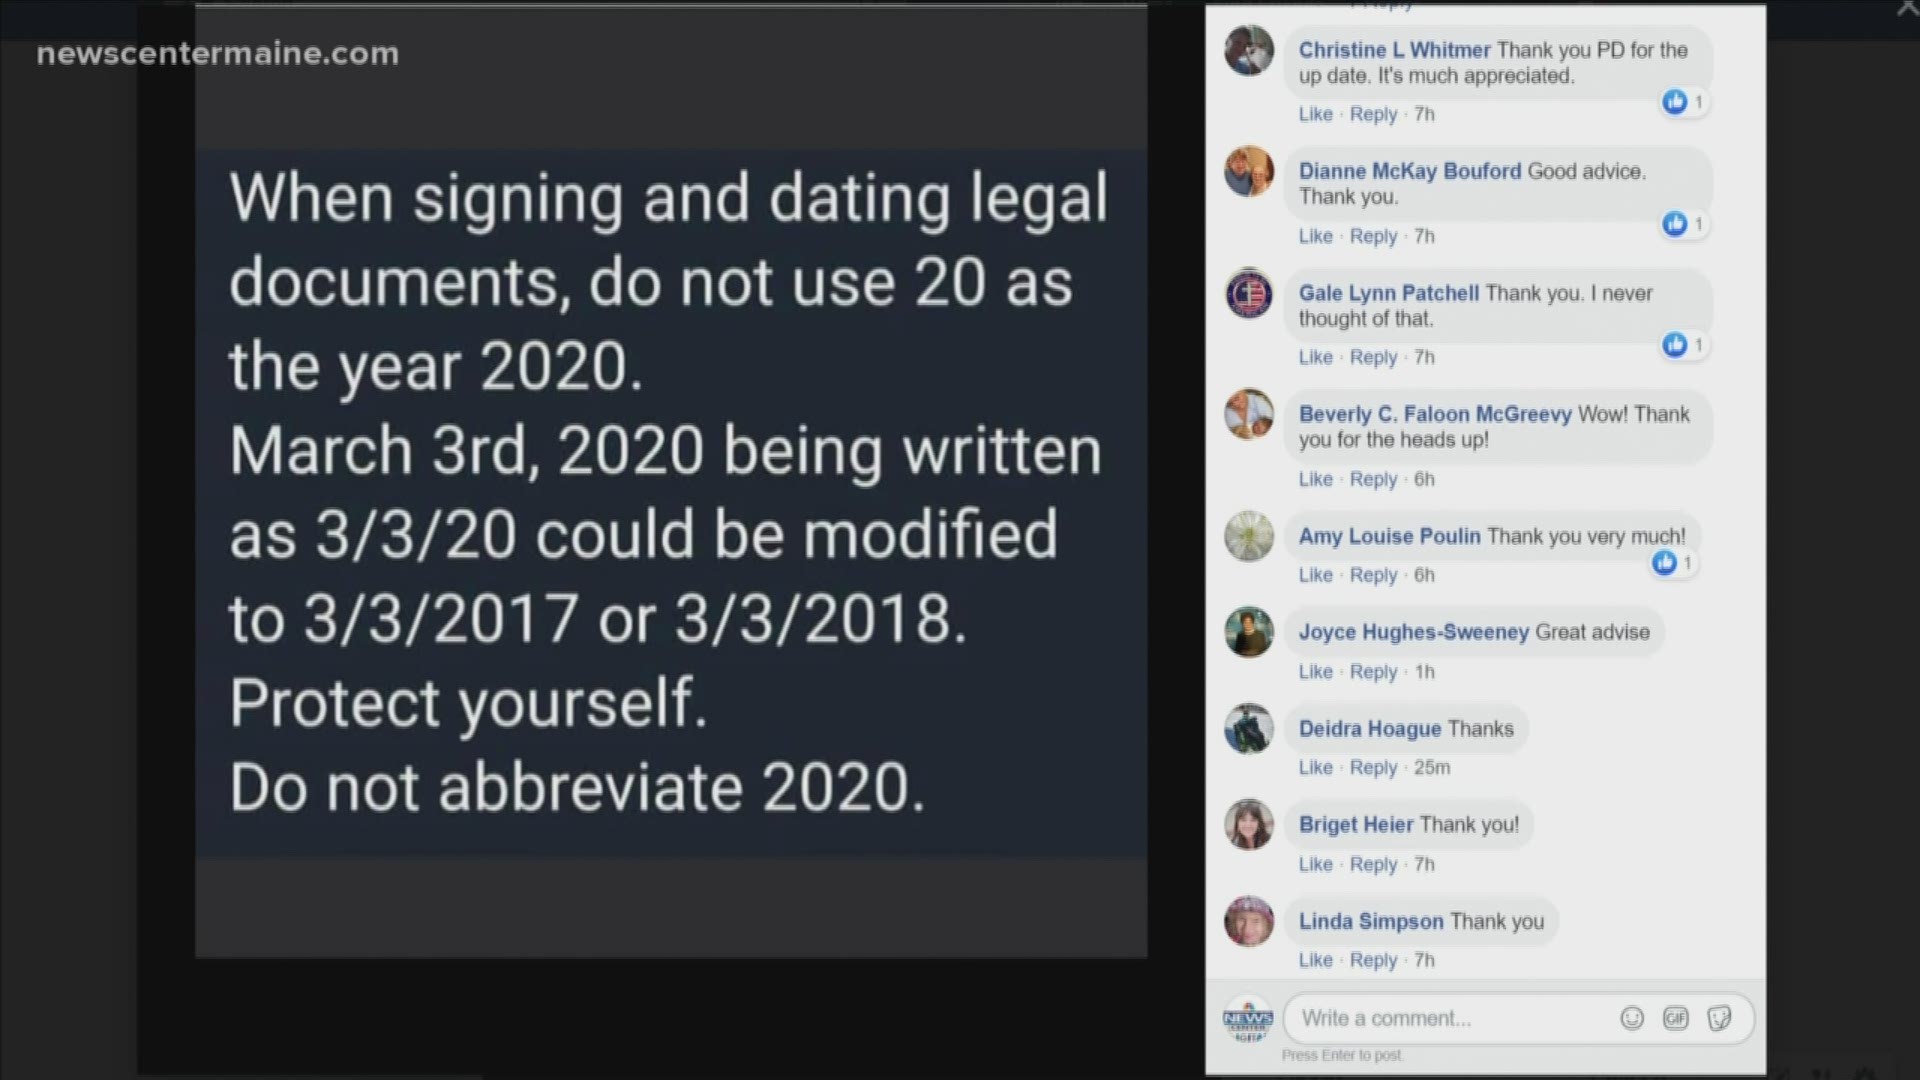 Police warn that you should not abbreviate 2020 when you sign and date important legal documents. Scammers could just add another number after the 20.